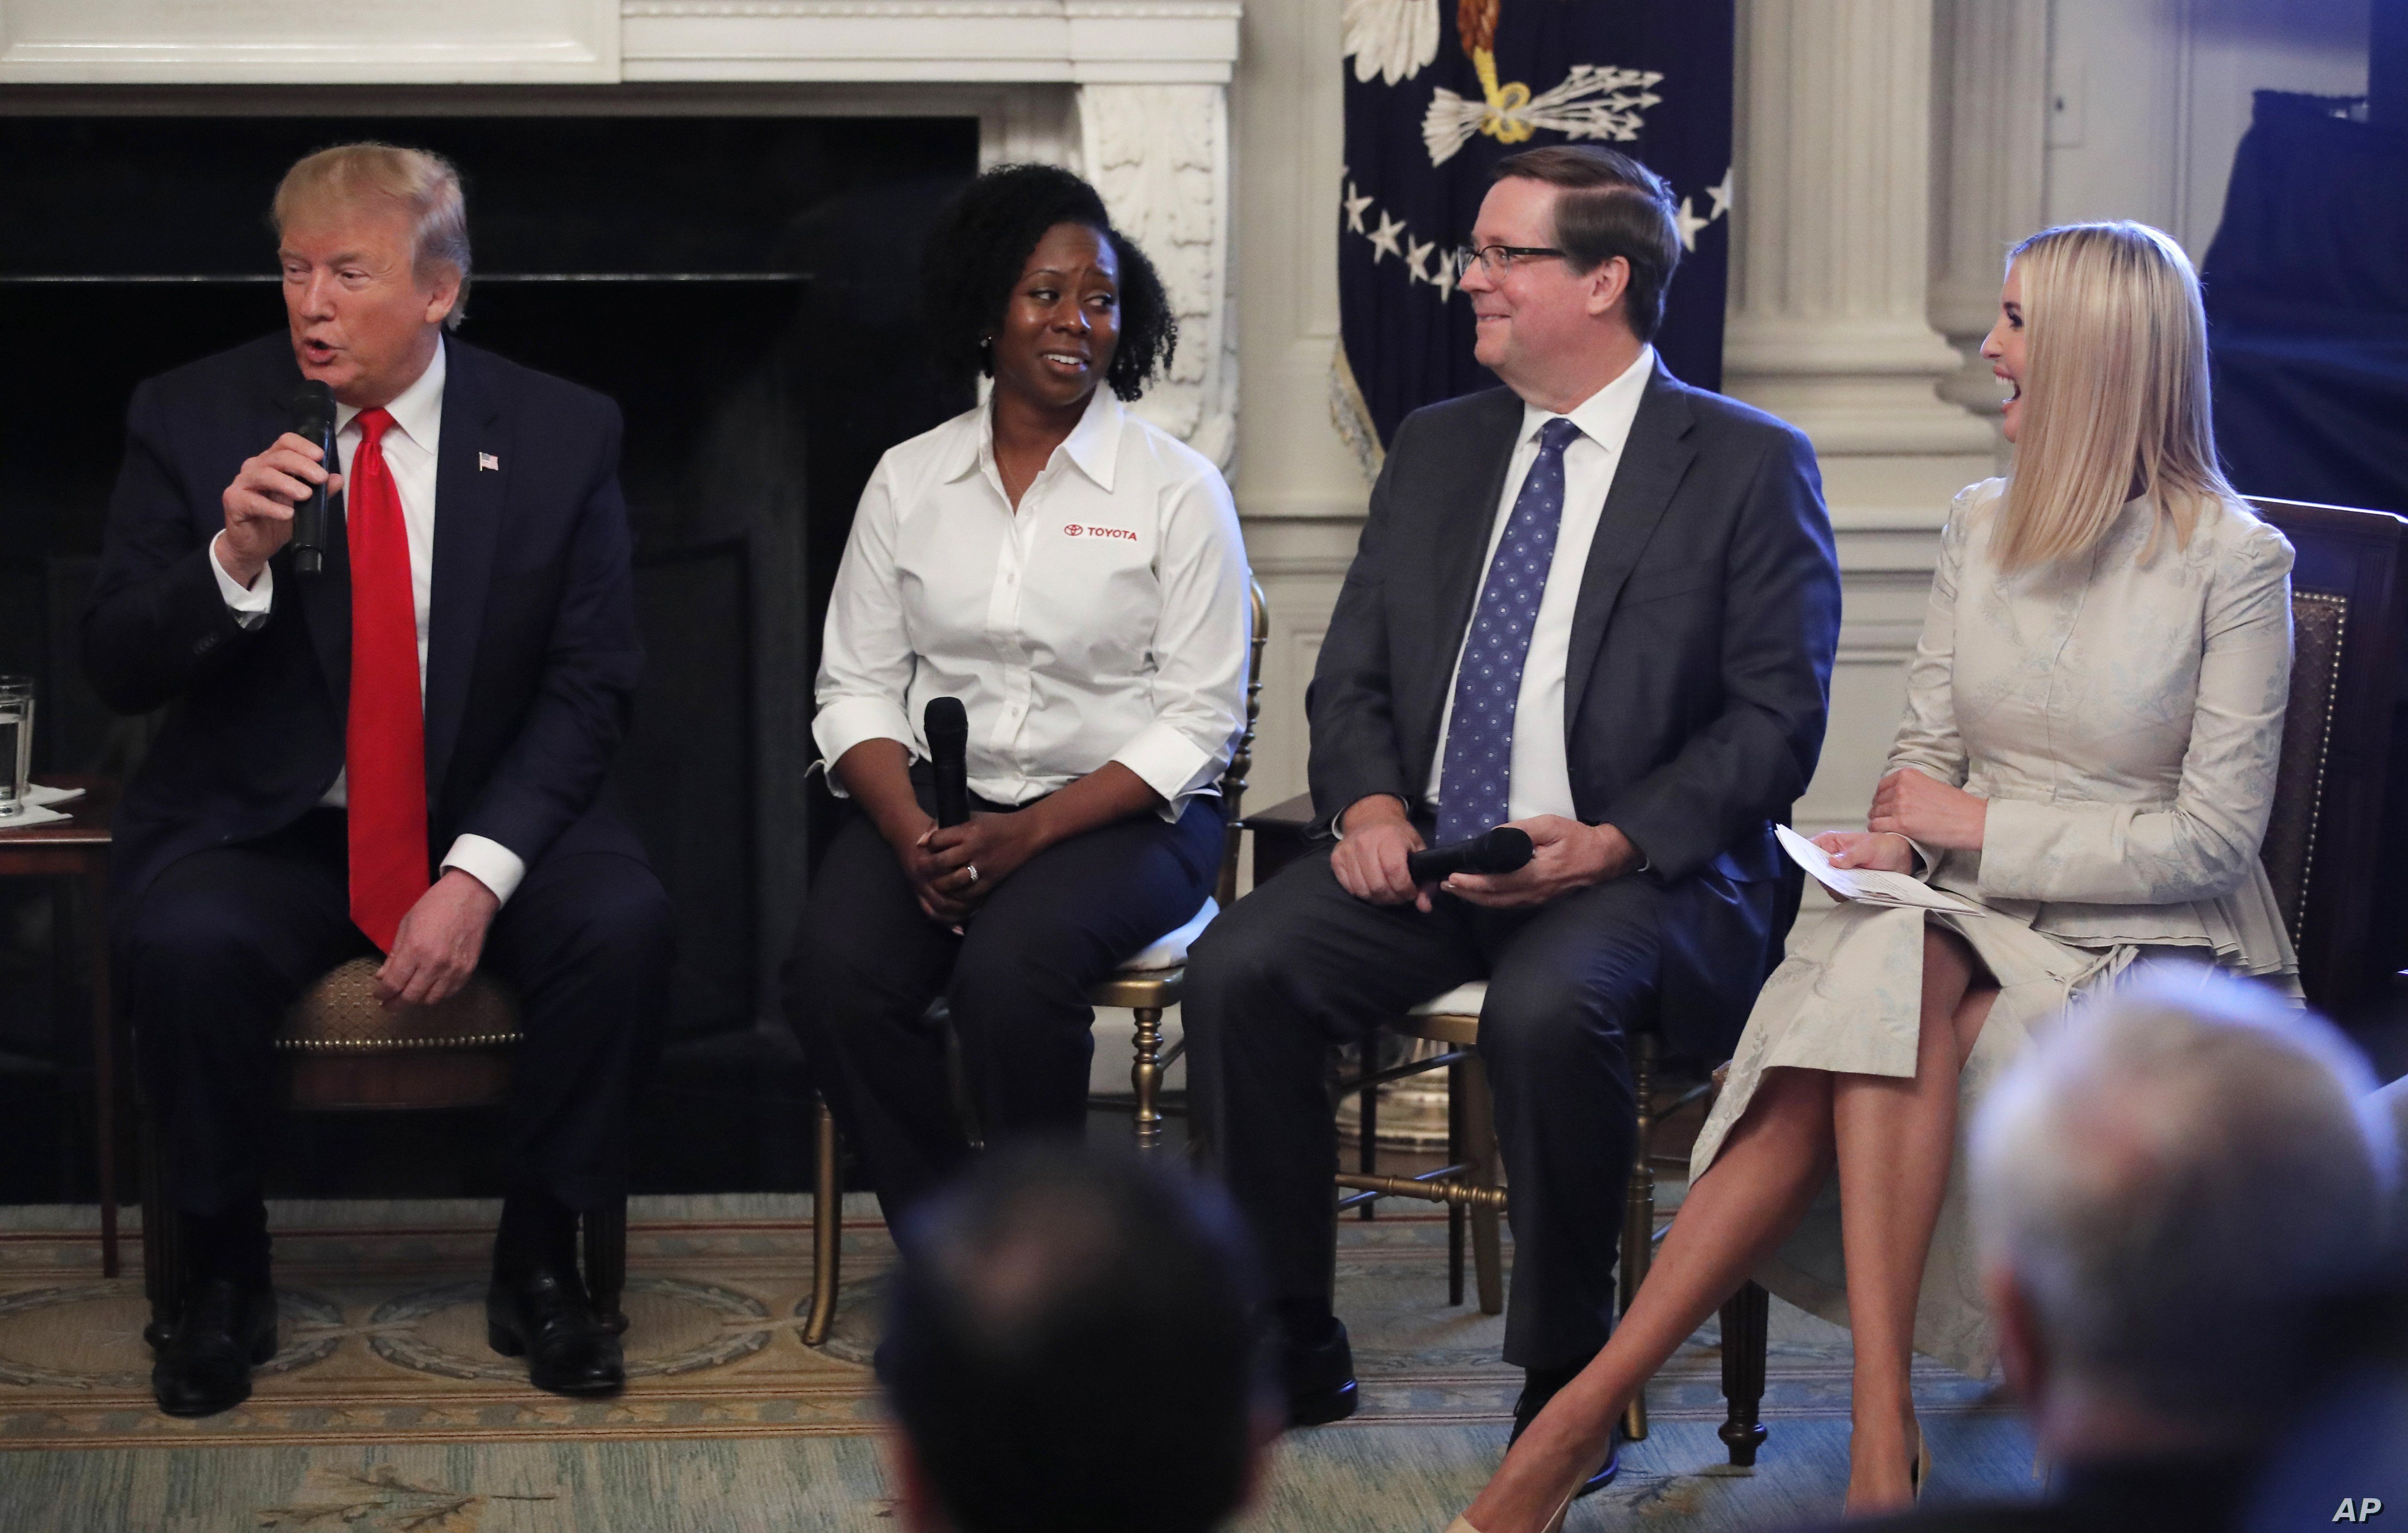 From left, President Donald Trump, joined by Shameka Whaley Green of Toyota, Jim Lentz, CEO of Toyota North America, and his daughter Ivanka Trump speaks during a 